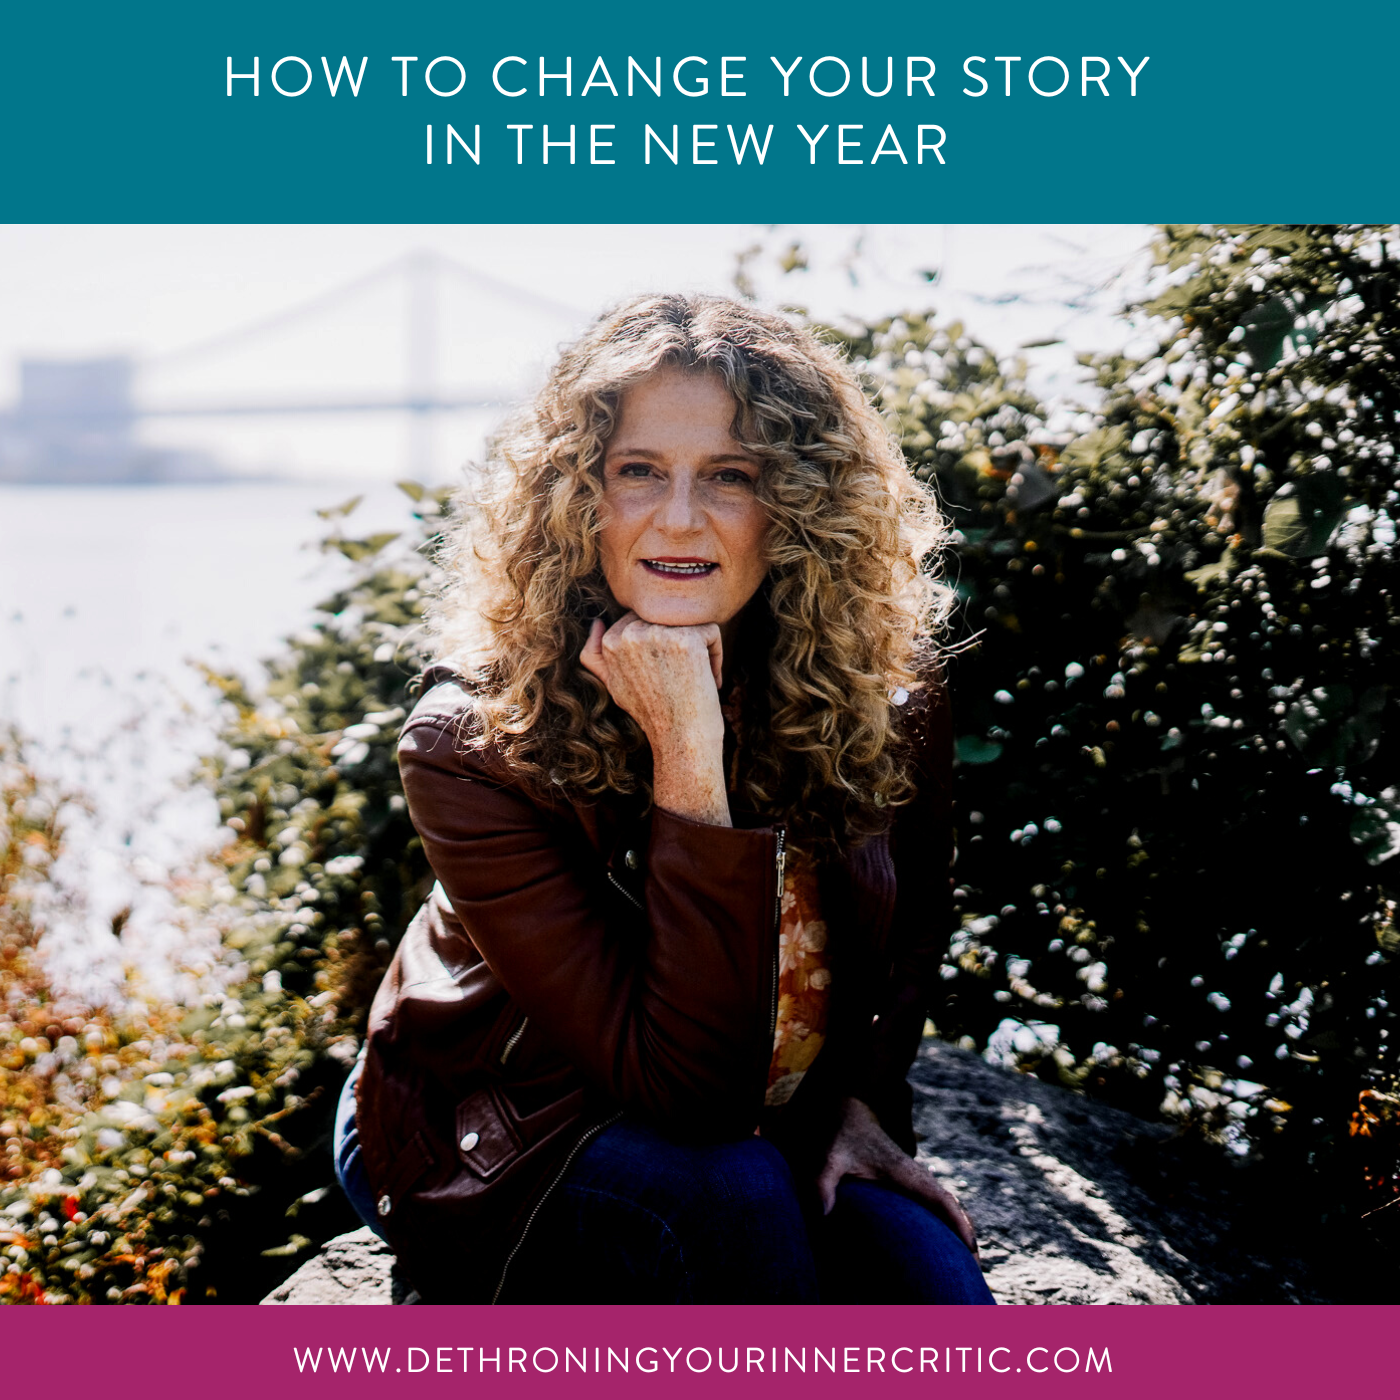 How to Change Your Story in the New Year